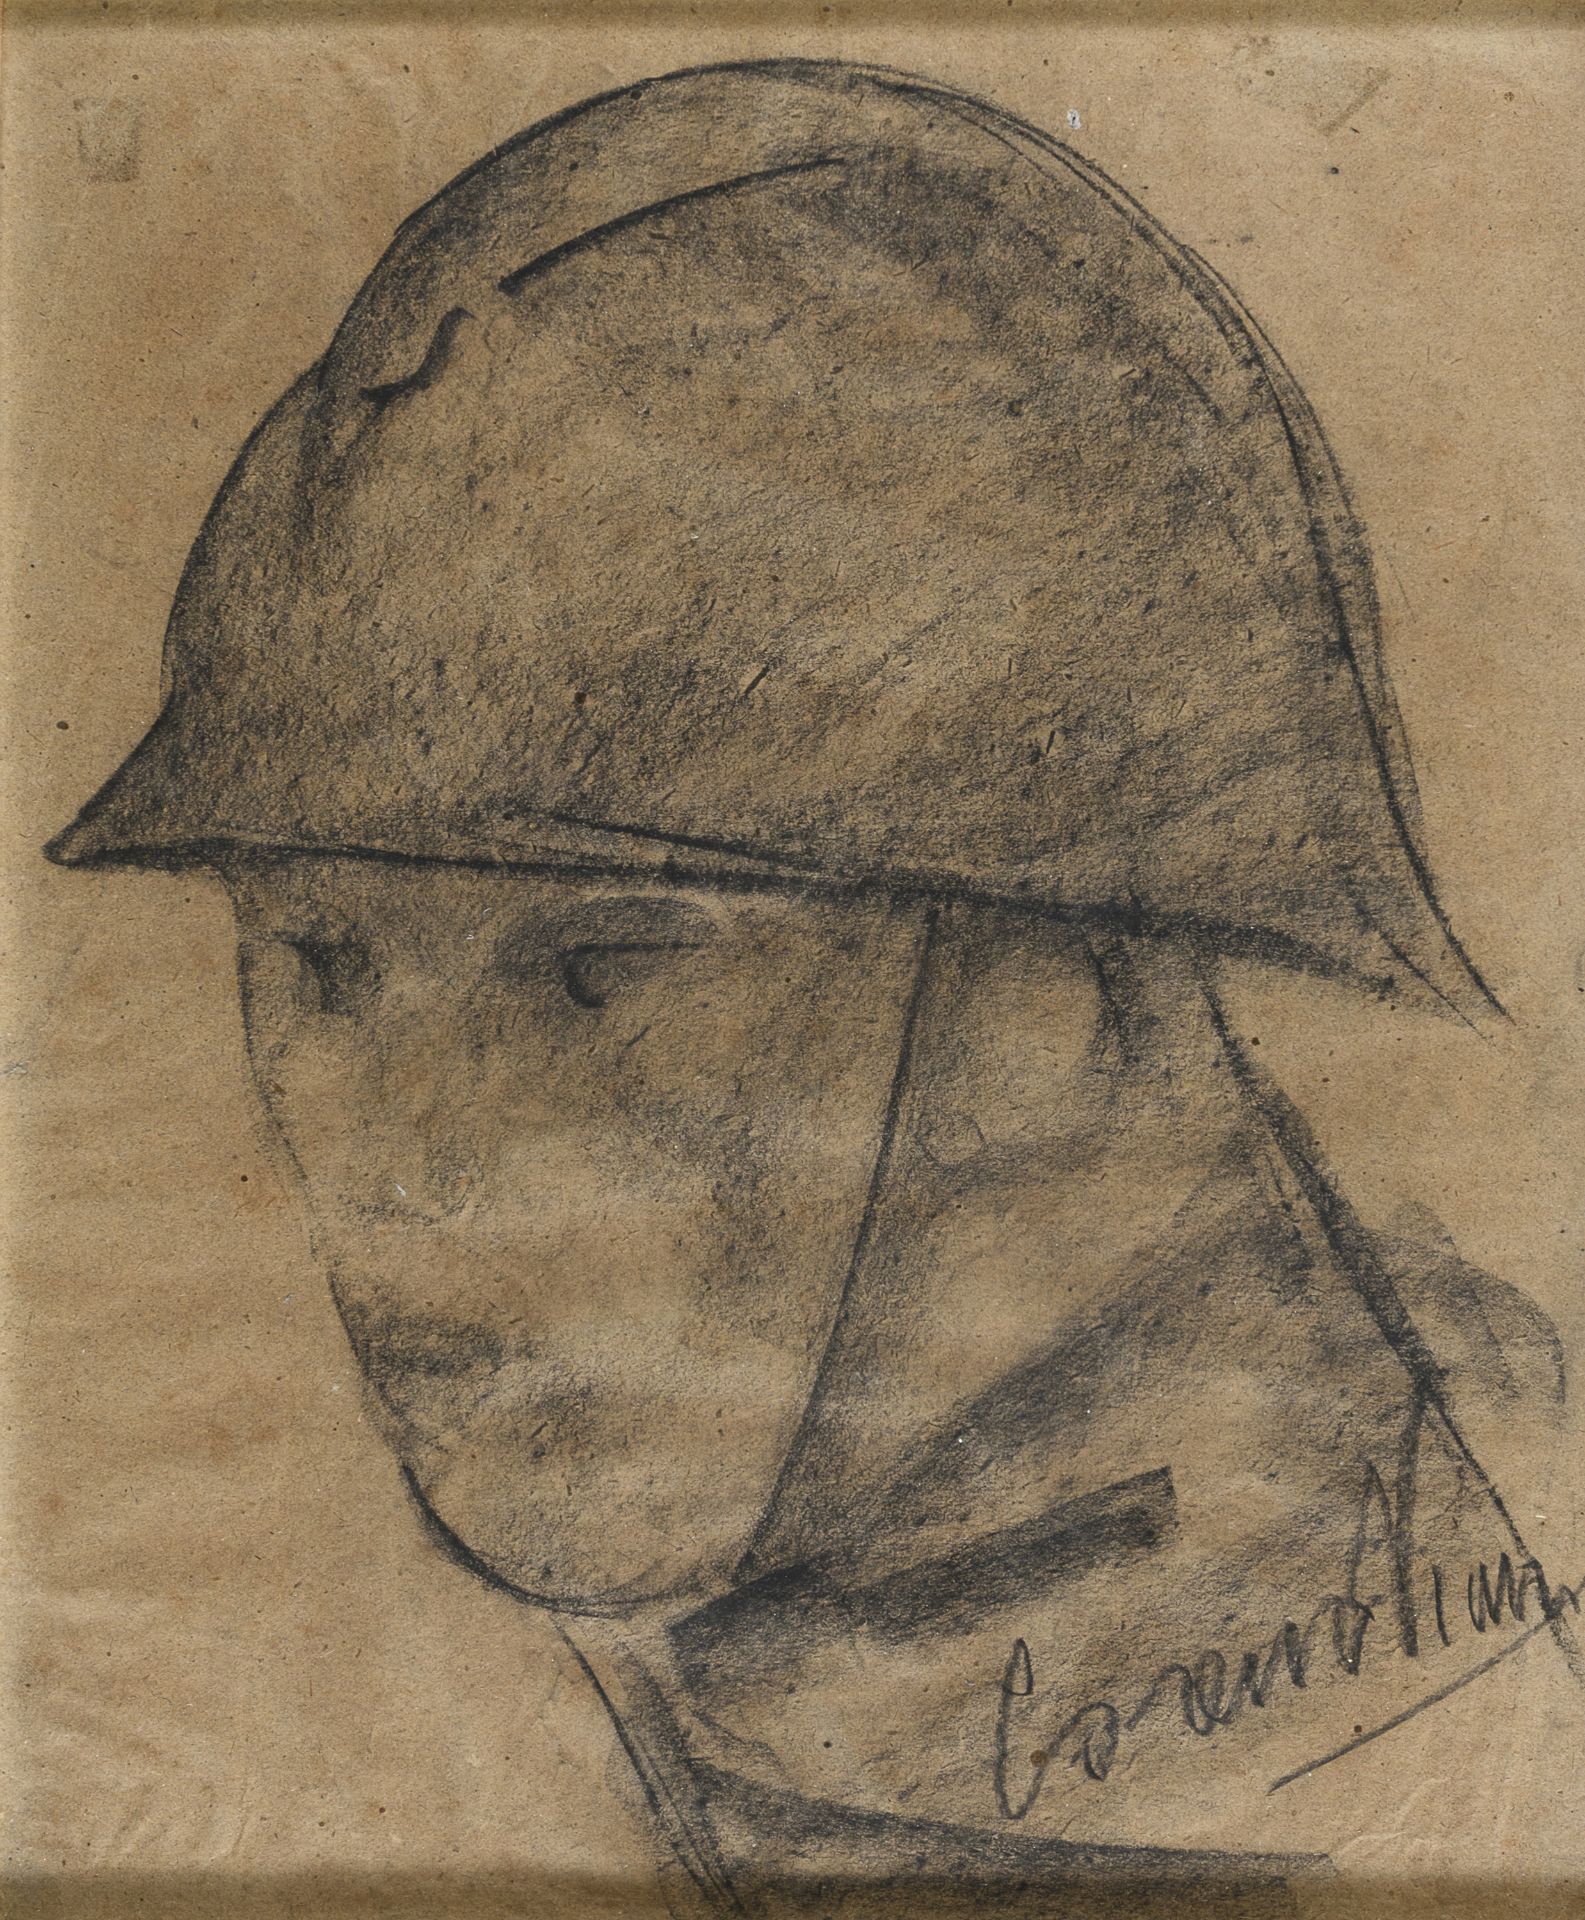 CHARCOAL DRAWING OF A SOLDIER BY LORENZO VIANI 1971